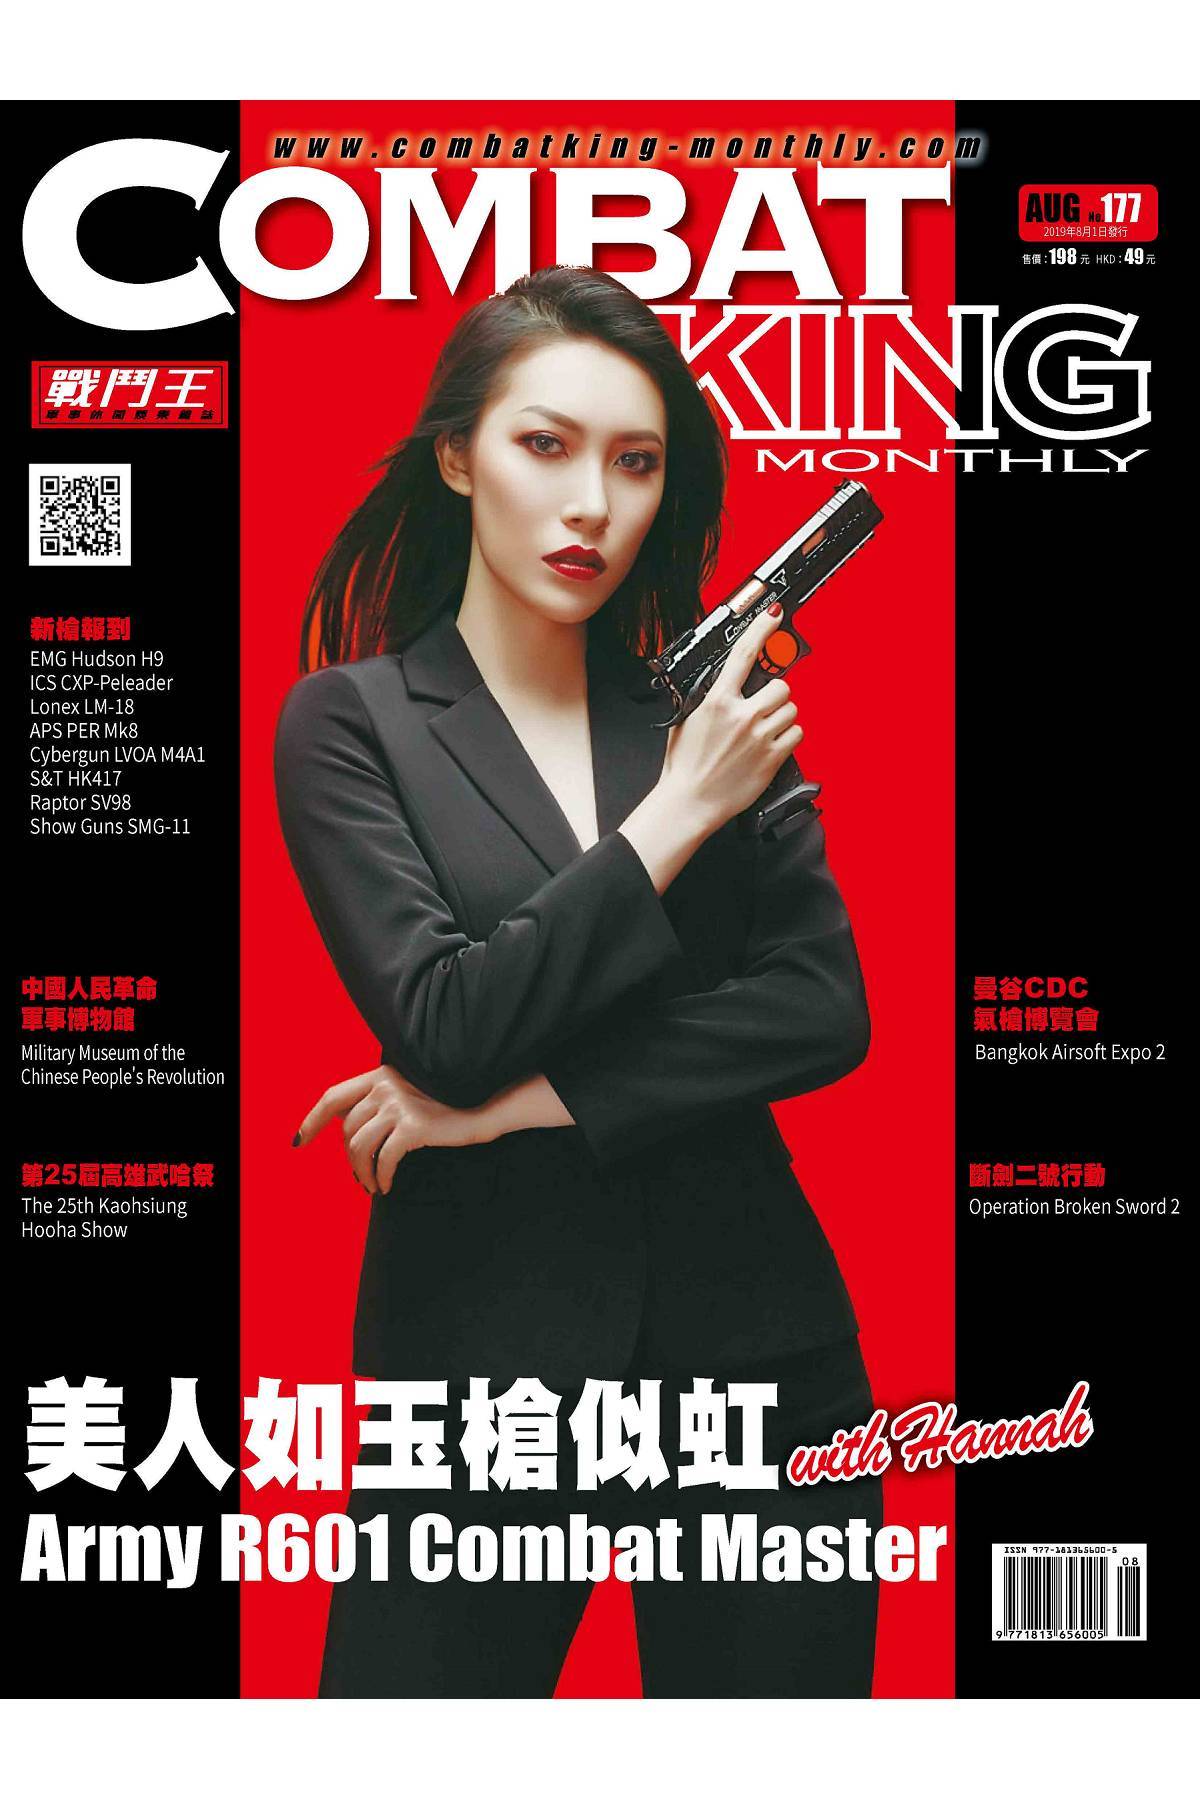 Combat King Monthly Issue177 August. 2019